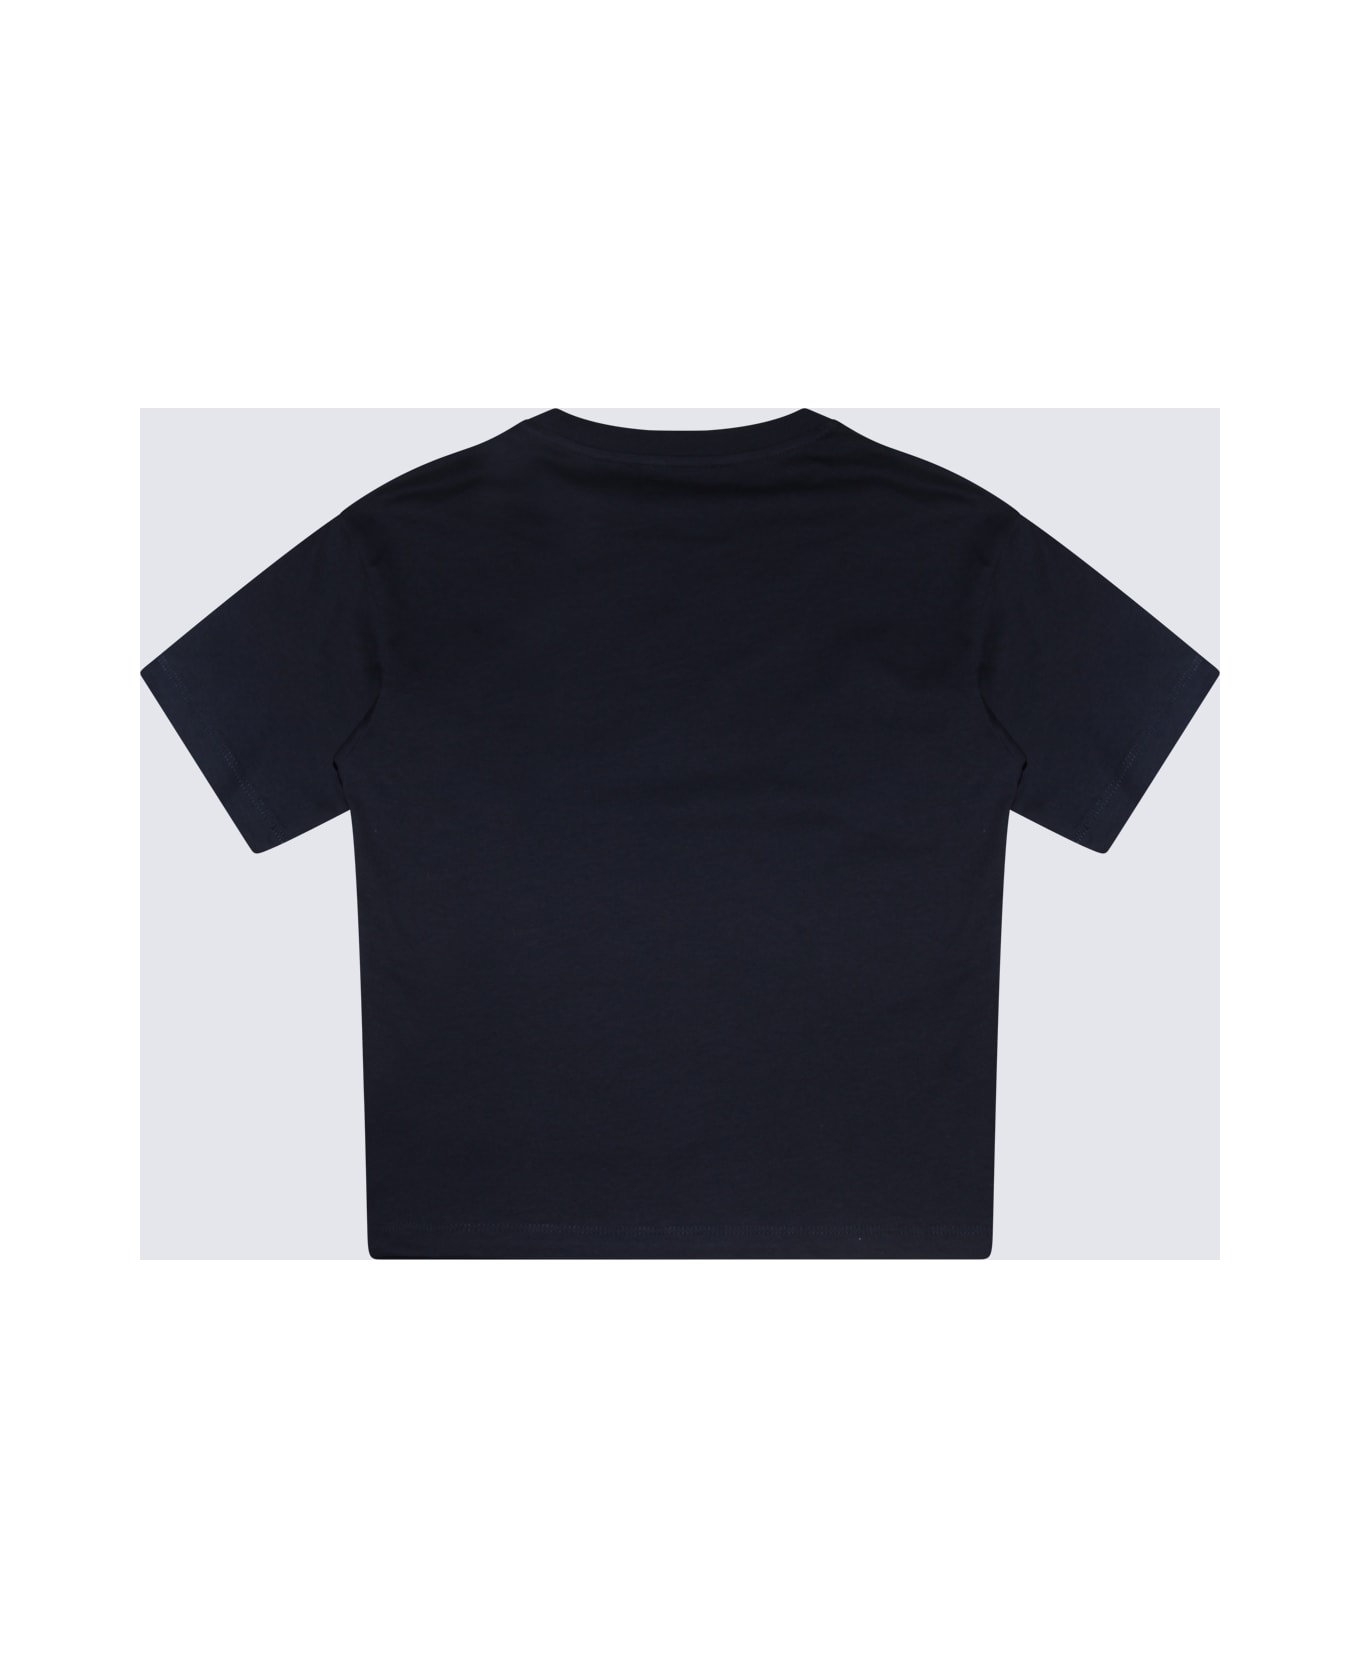 Balmain Navy Blue And White Cotton T-shirt - Slim Fit Velour Polo With Zip Neck